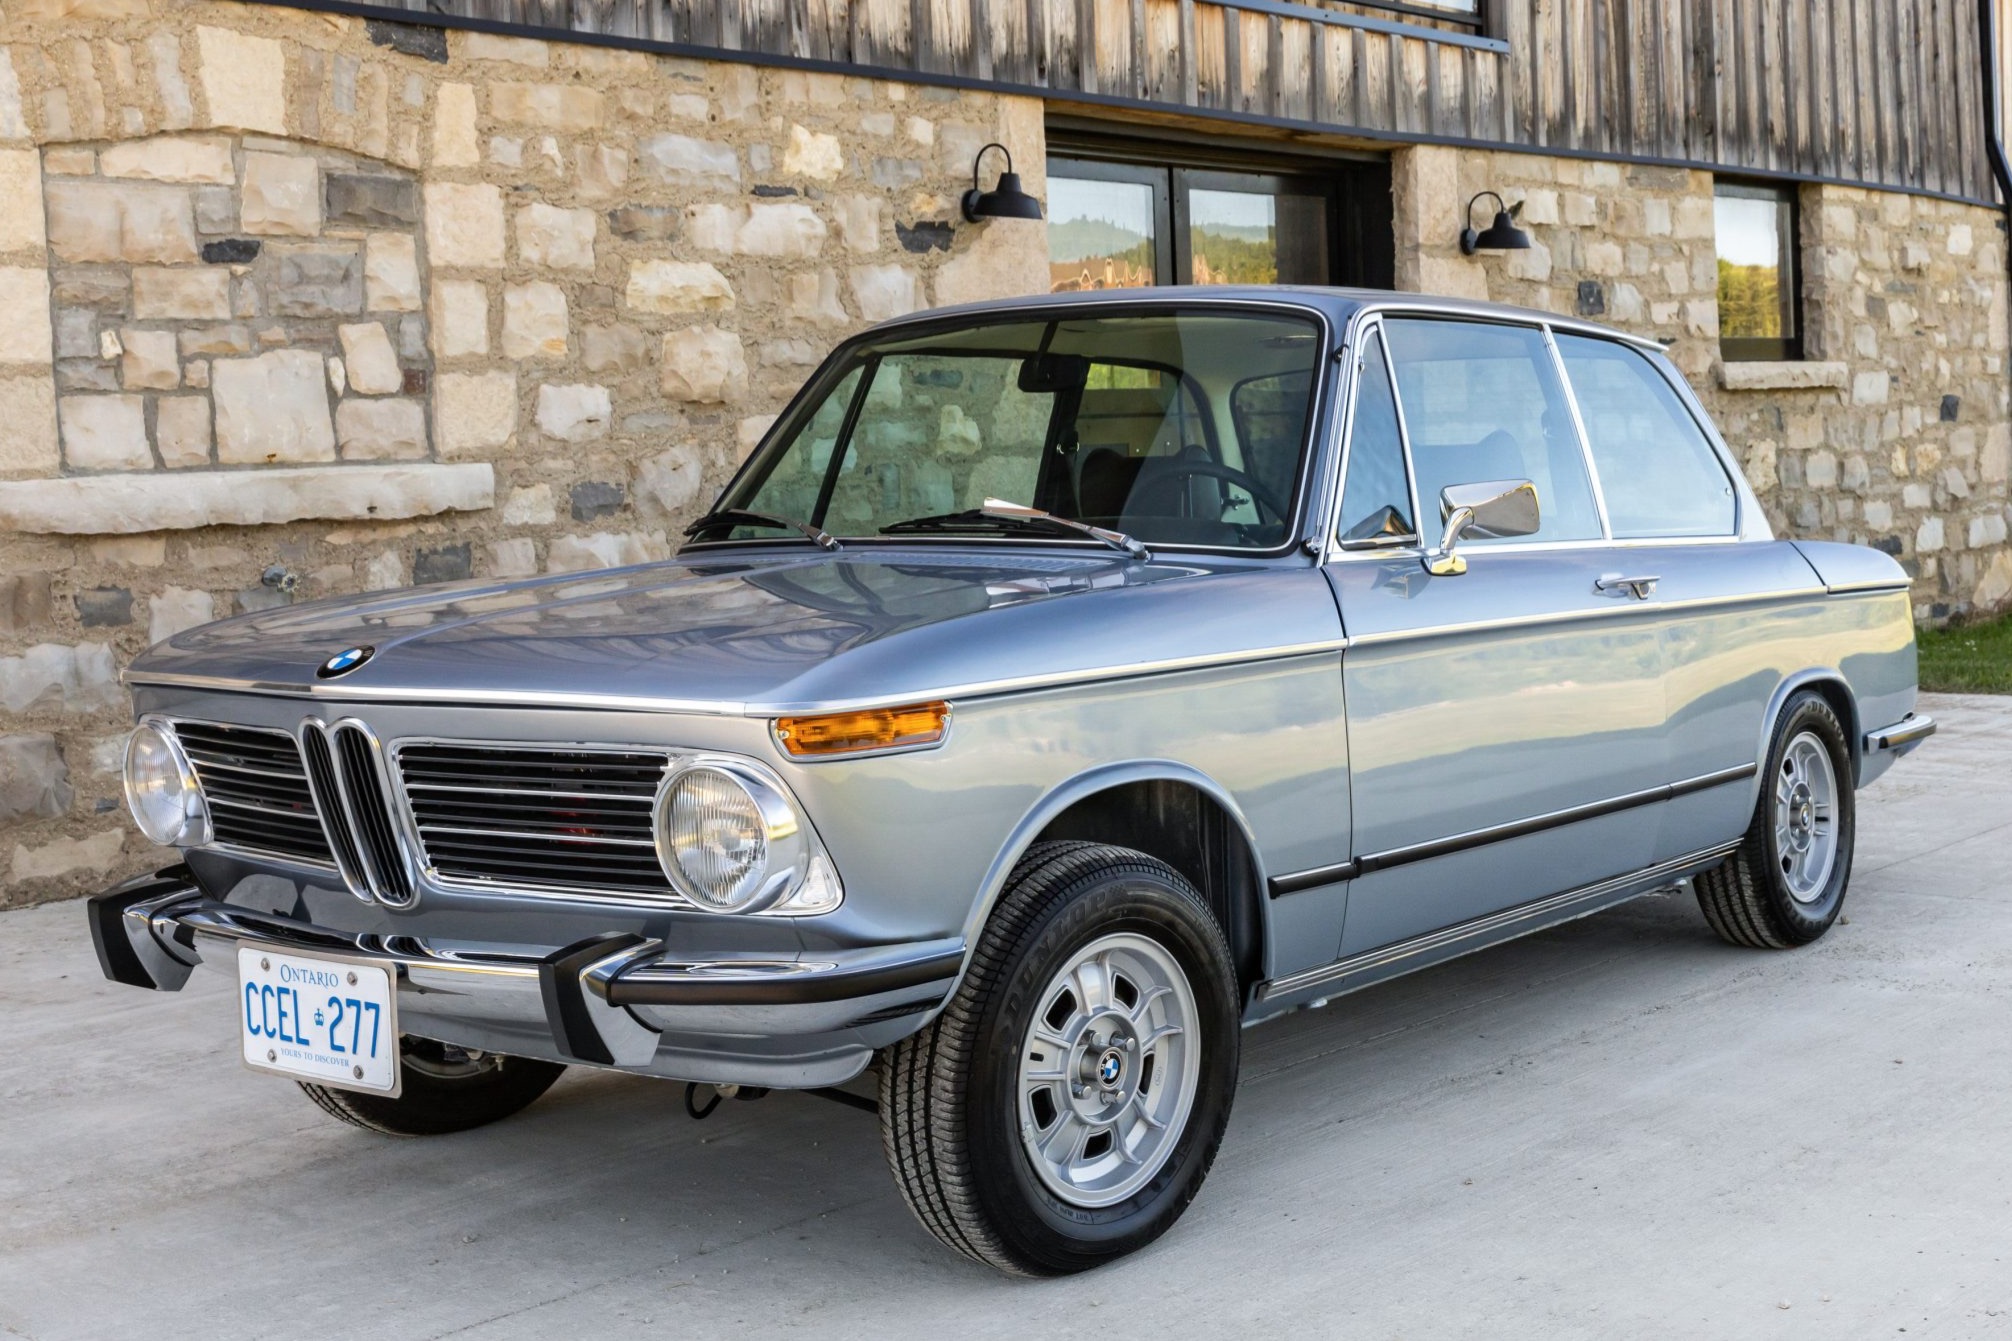 Used 1974 BMW 2002tii 5-Speed Review